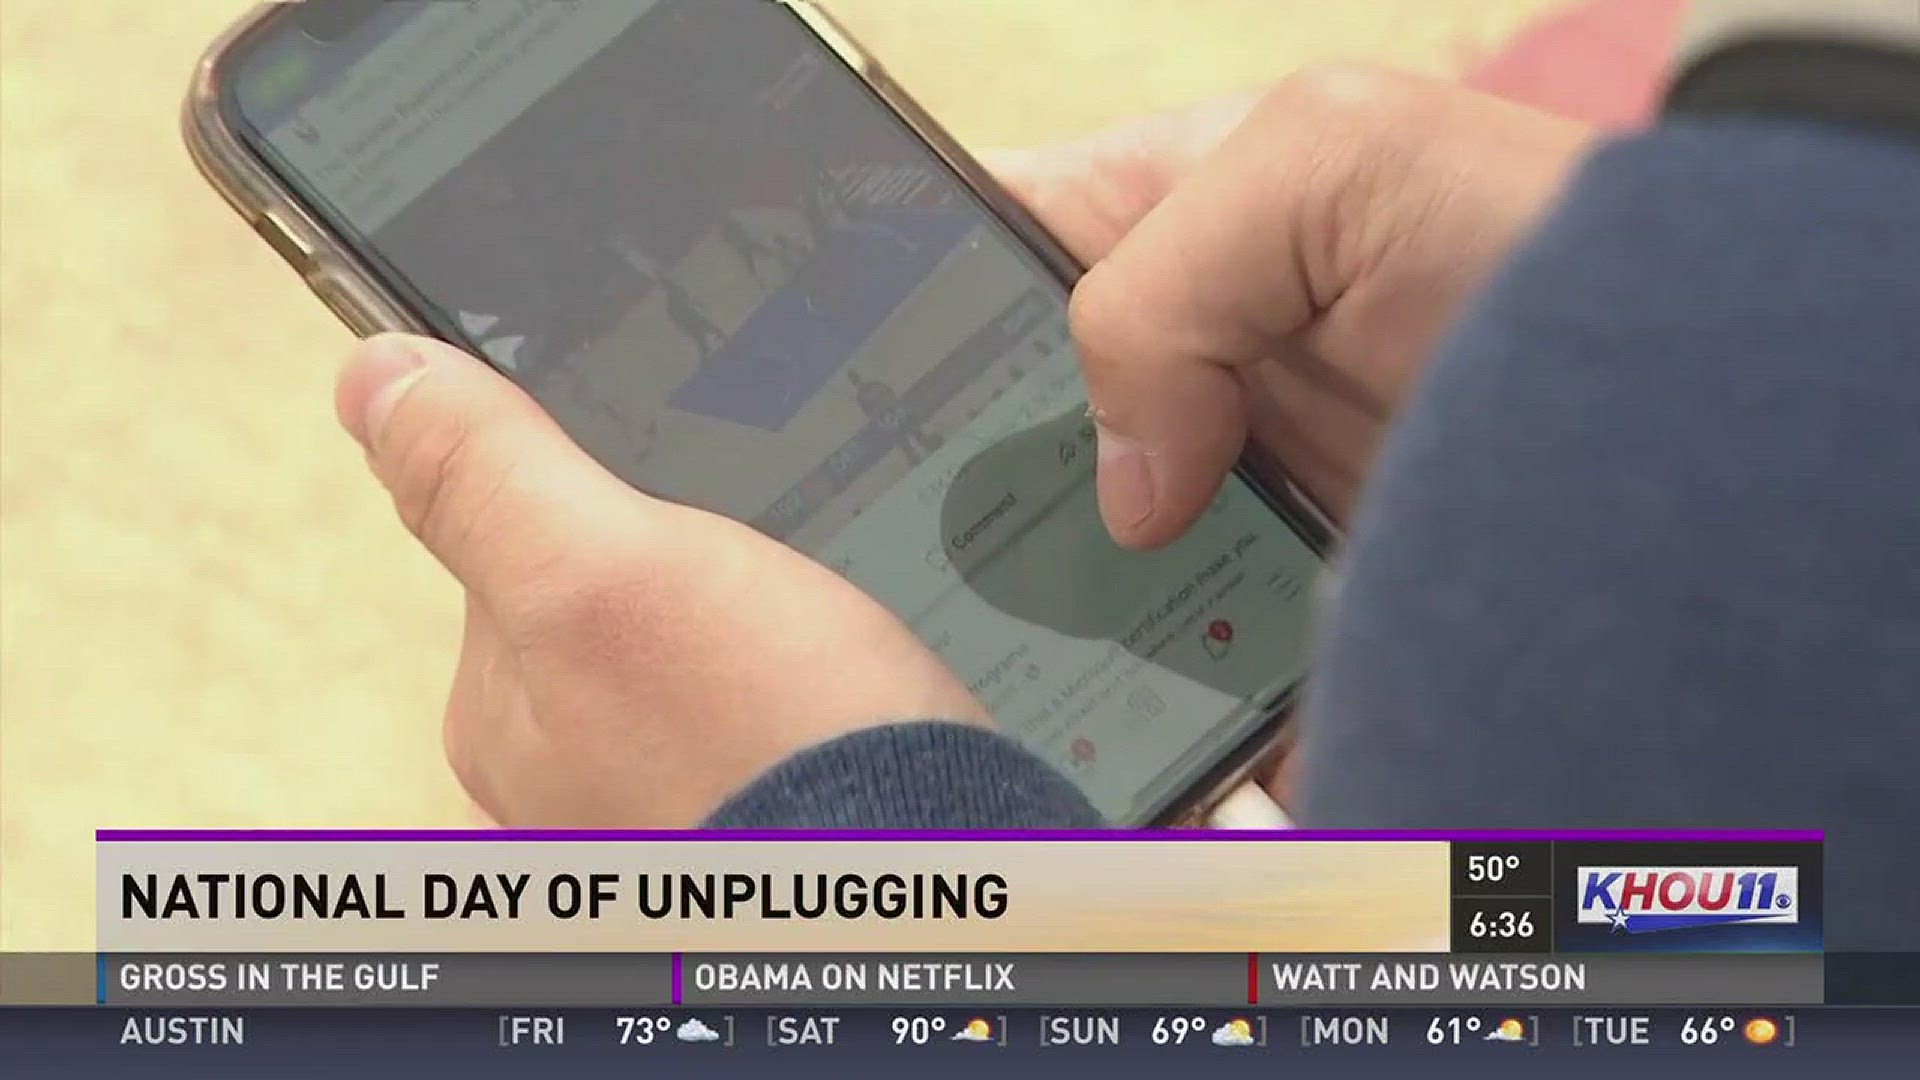 Are you addicted to technology? Could you go without it for 24 hours? Well, Friday is the day to try, it's National Day of Unplugging!